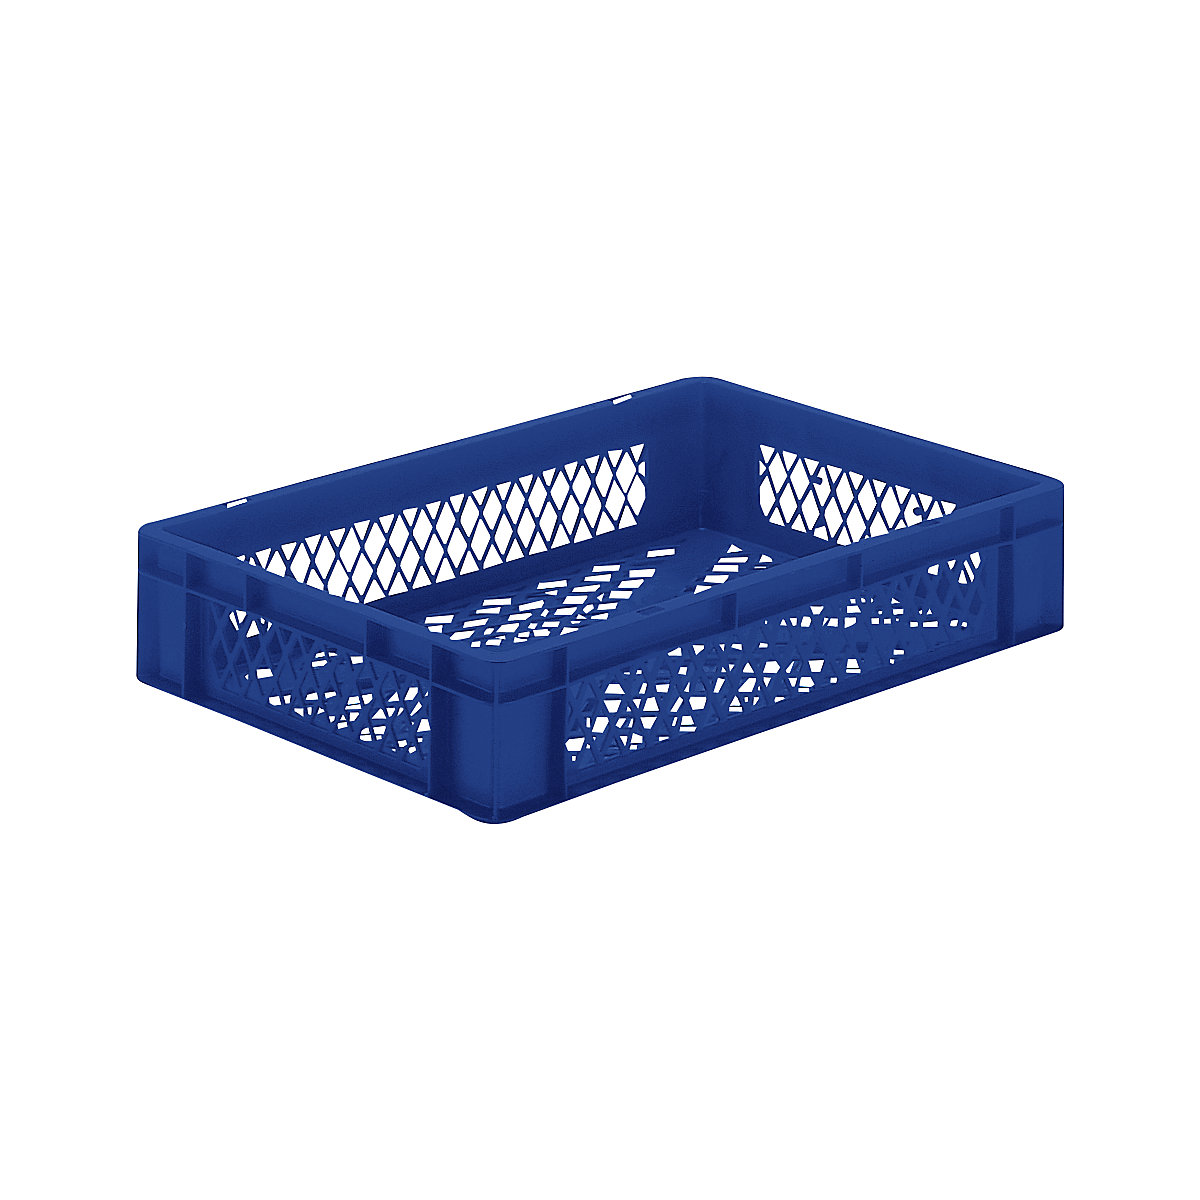 Euro stacking container, perforated walls and base, LxWxH 600 x 400 x 120 mm, blue, pack of 5-5